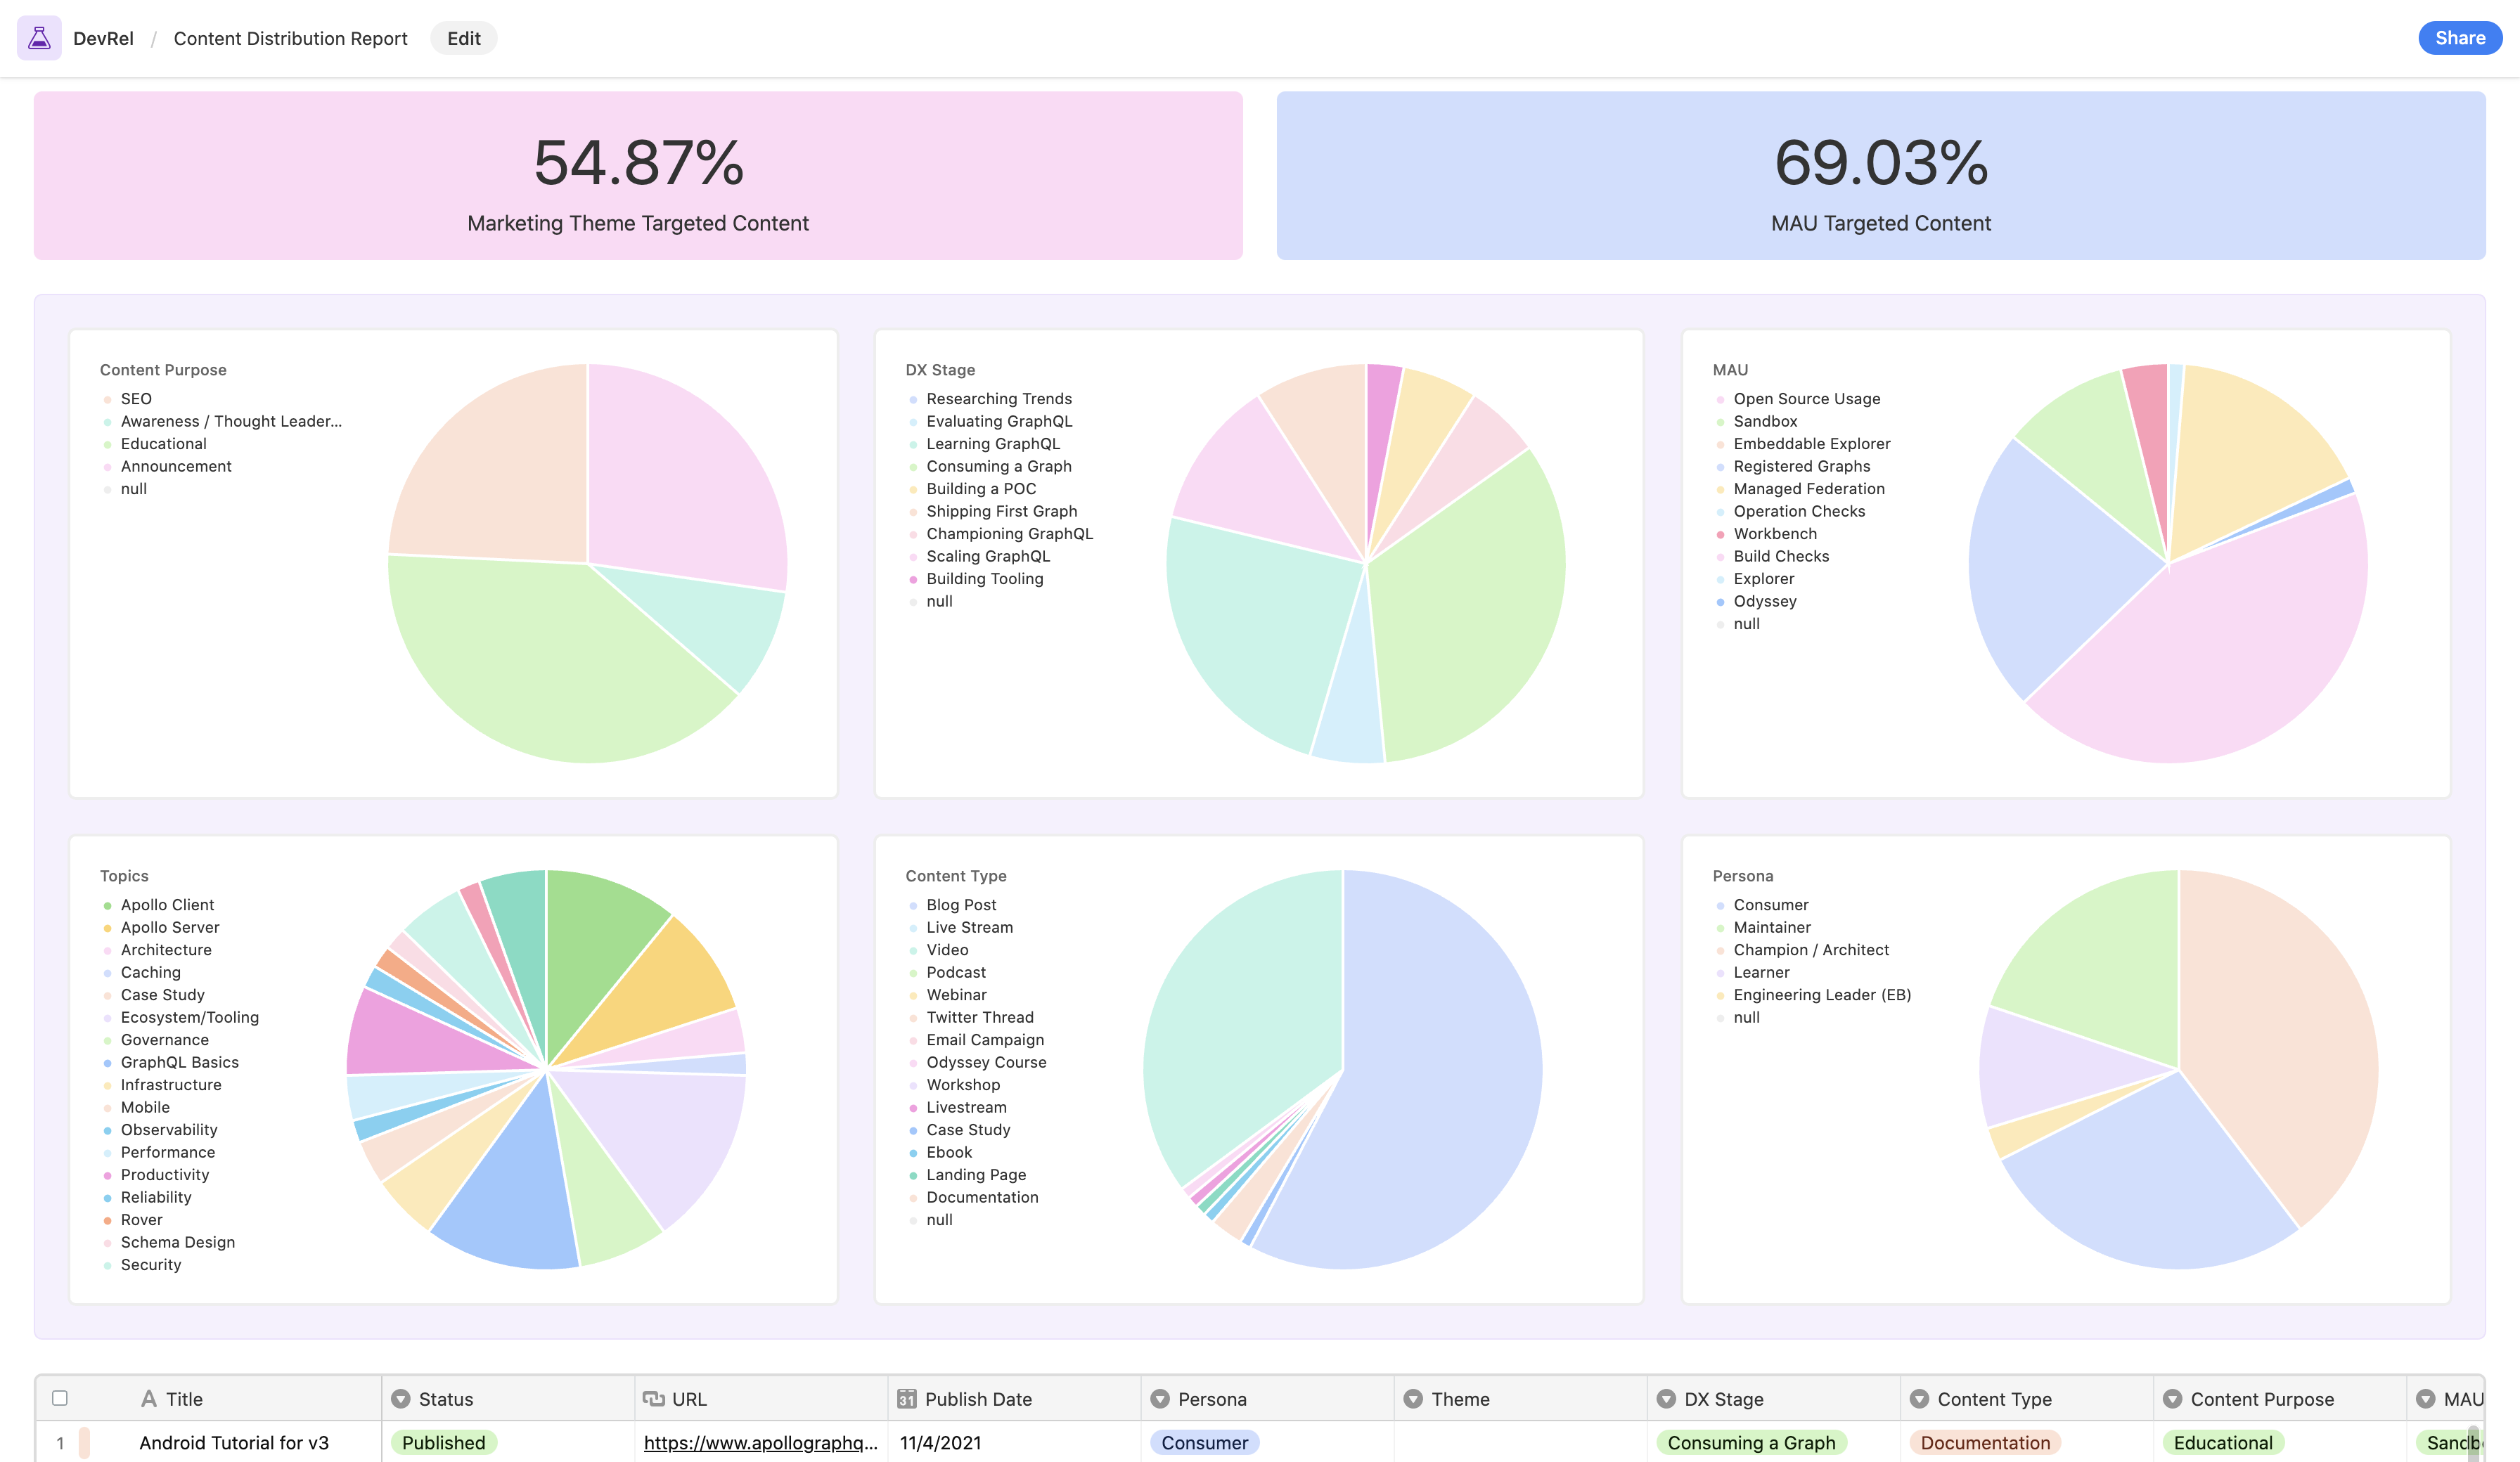 A screenshot of an Airtable reporting dashboard with some high level metrics and some pie charts below. They represent the content distribution of content created by the DevRel team at Apollo GraphQL